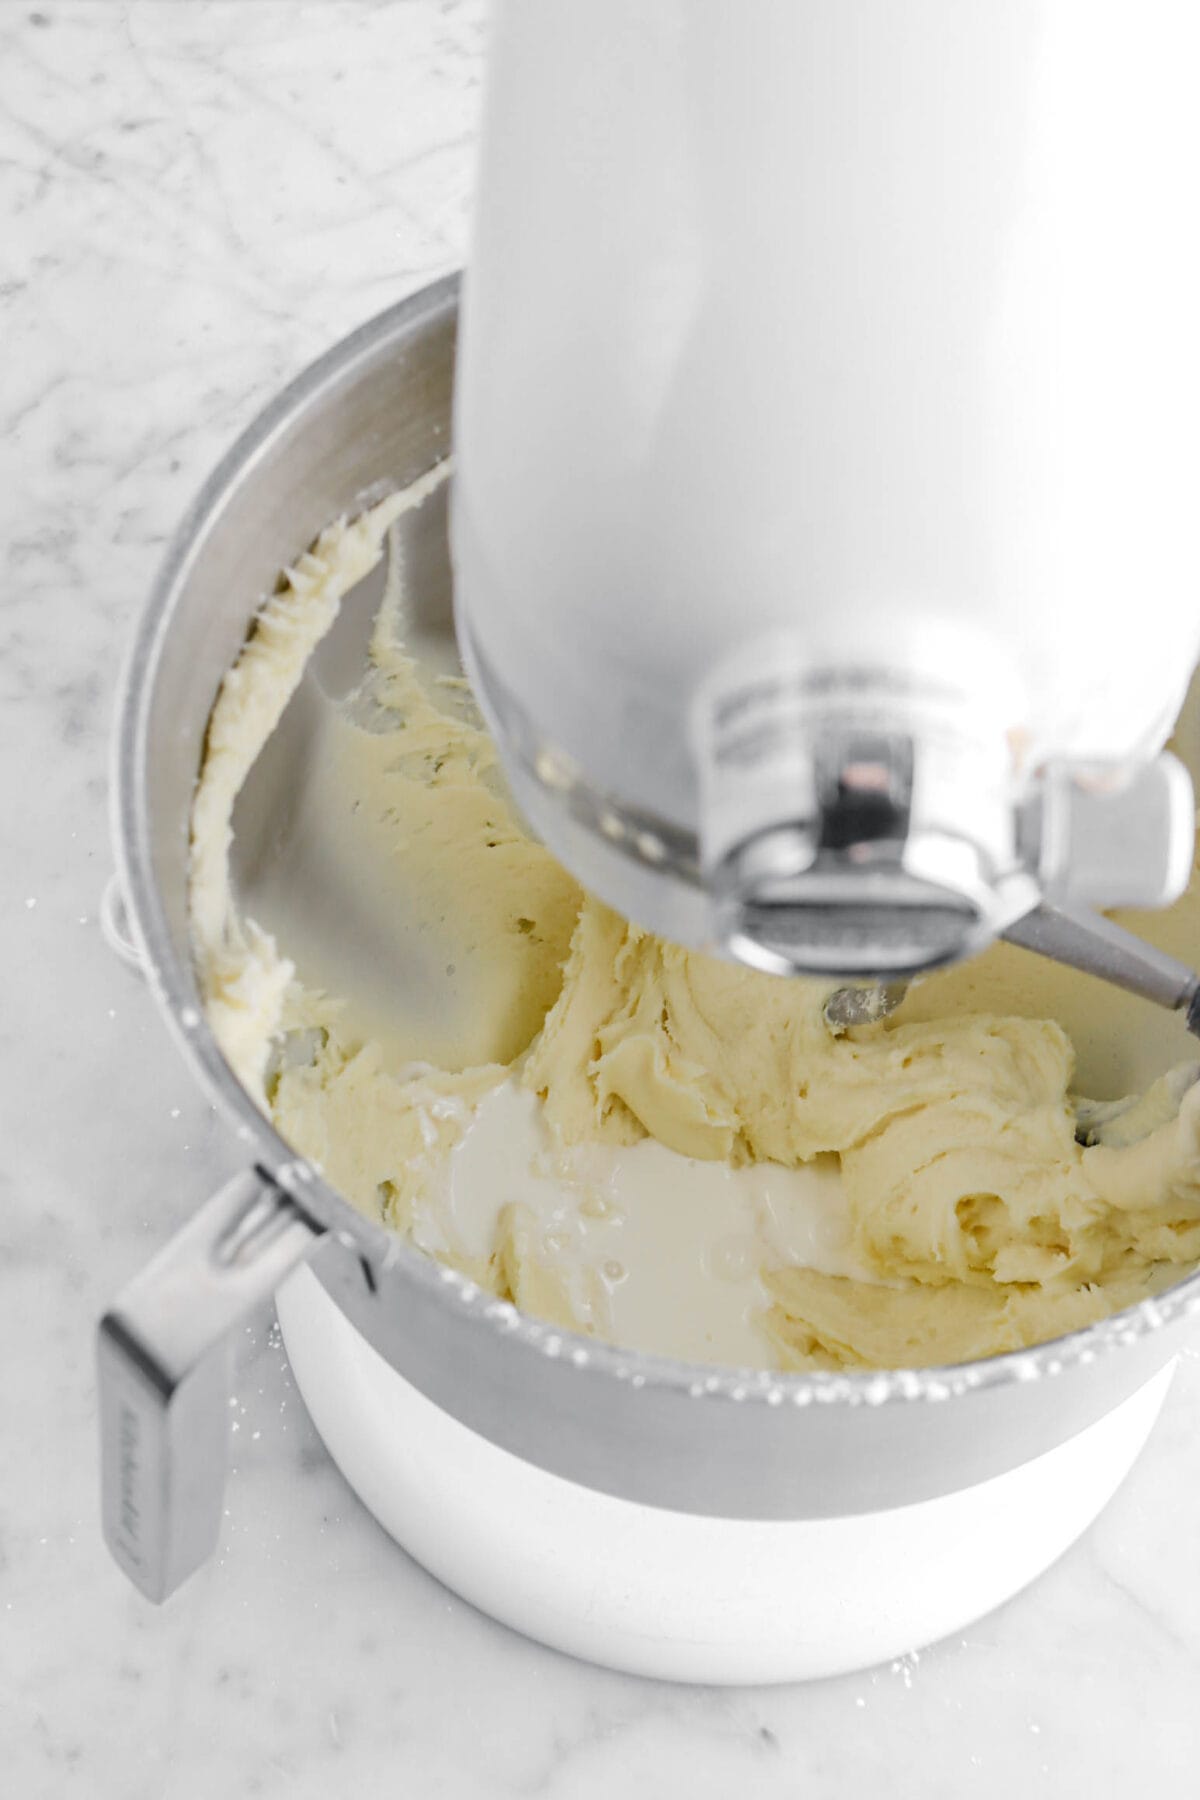 cream added to butter mixture.